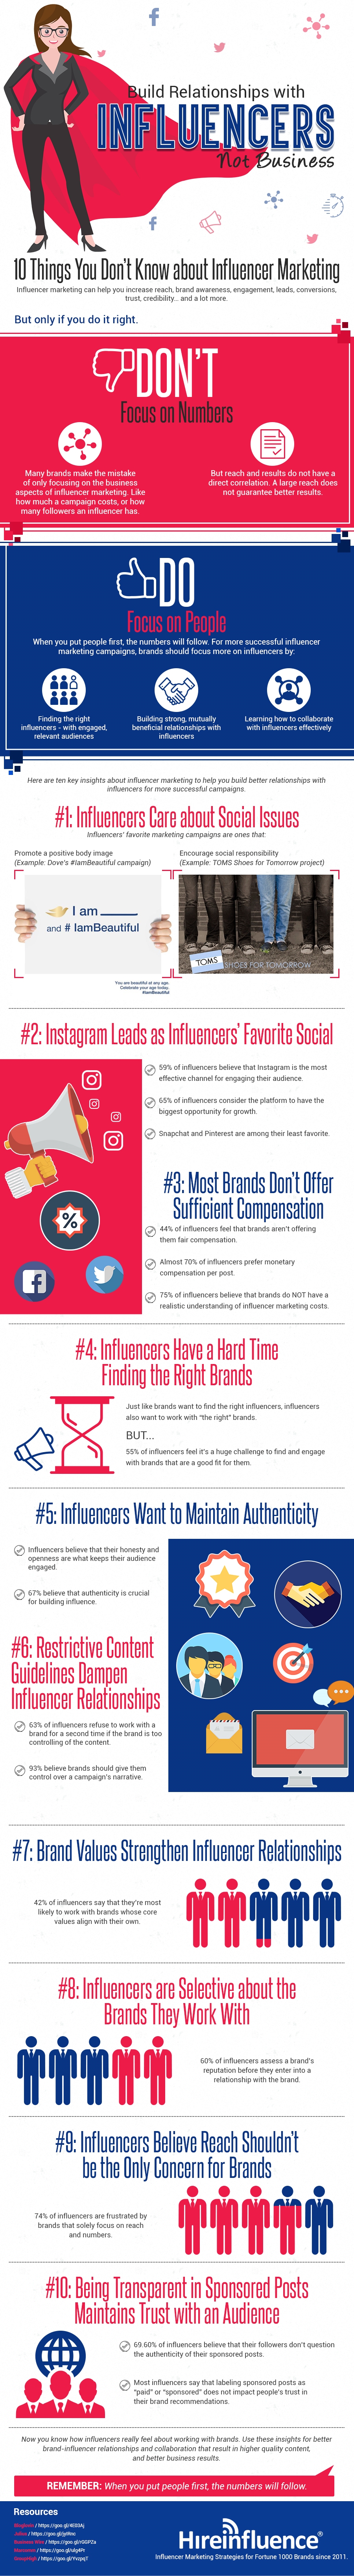 Build Relationships With Influencers, Not Businesses [Infographic]